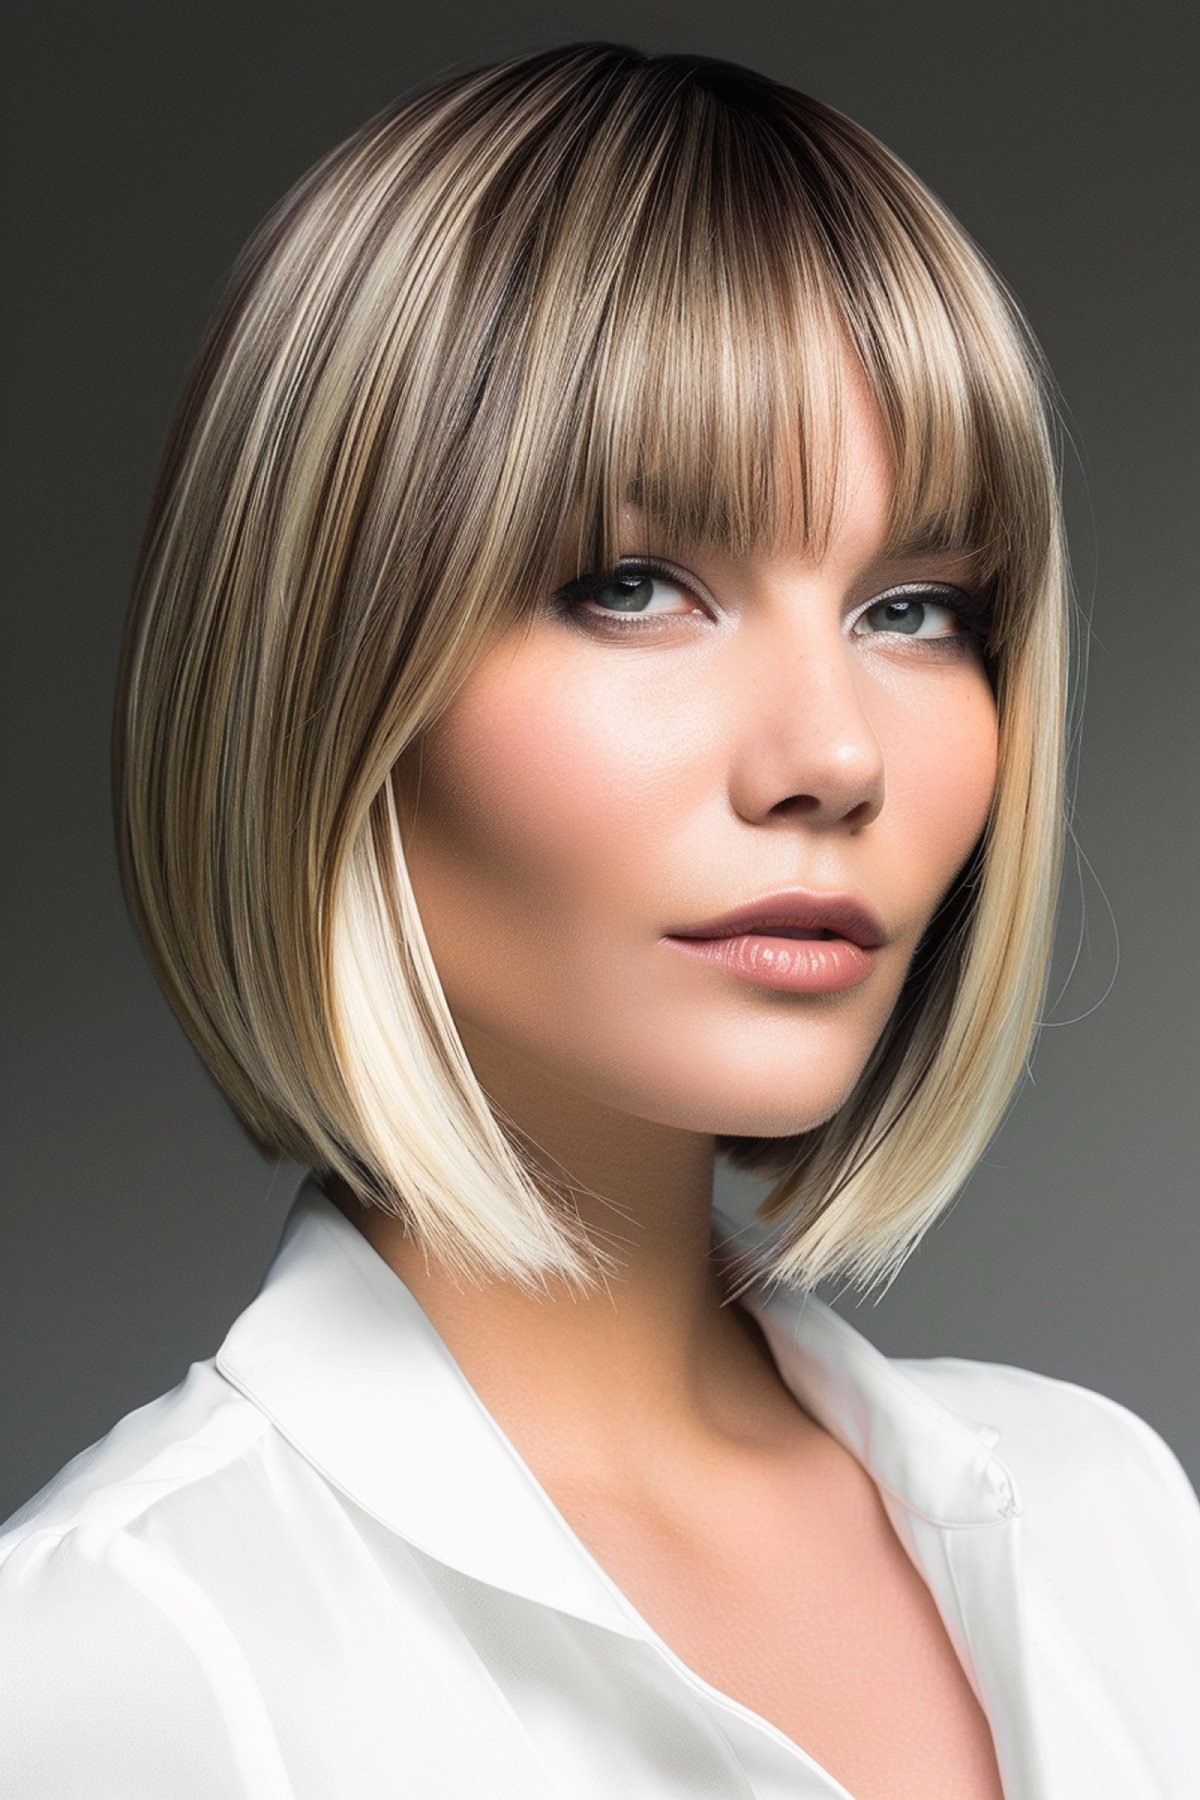 Executive Straight Bob Hairstyle with Highlighted Bangs for Professional Settings